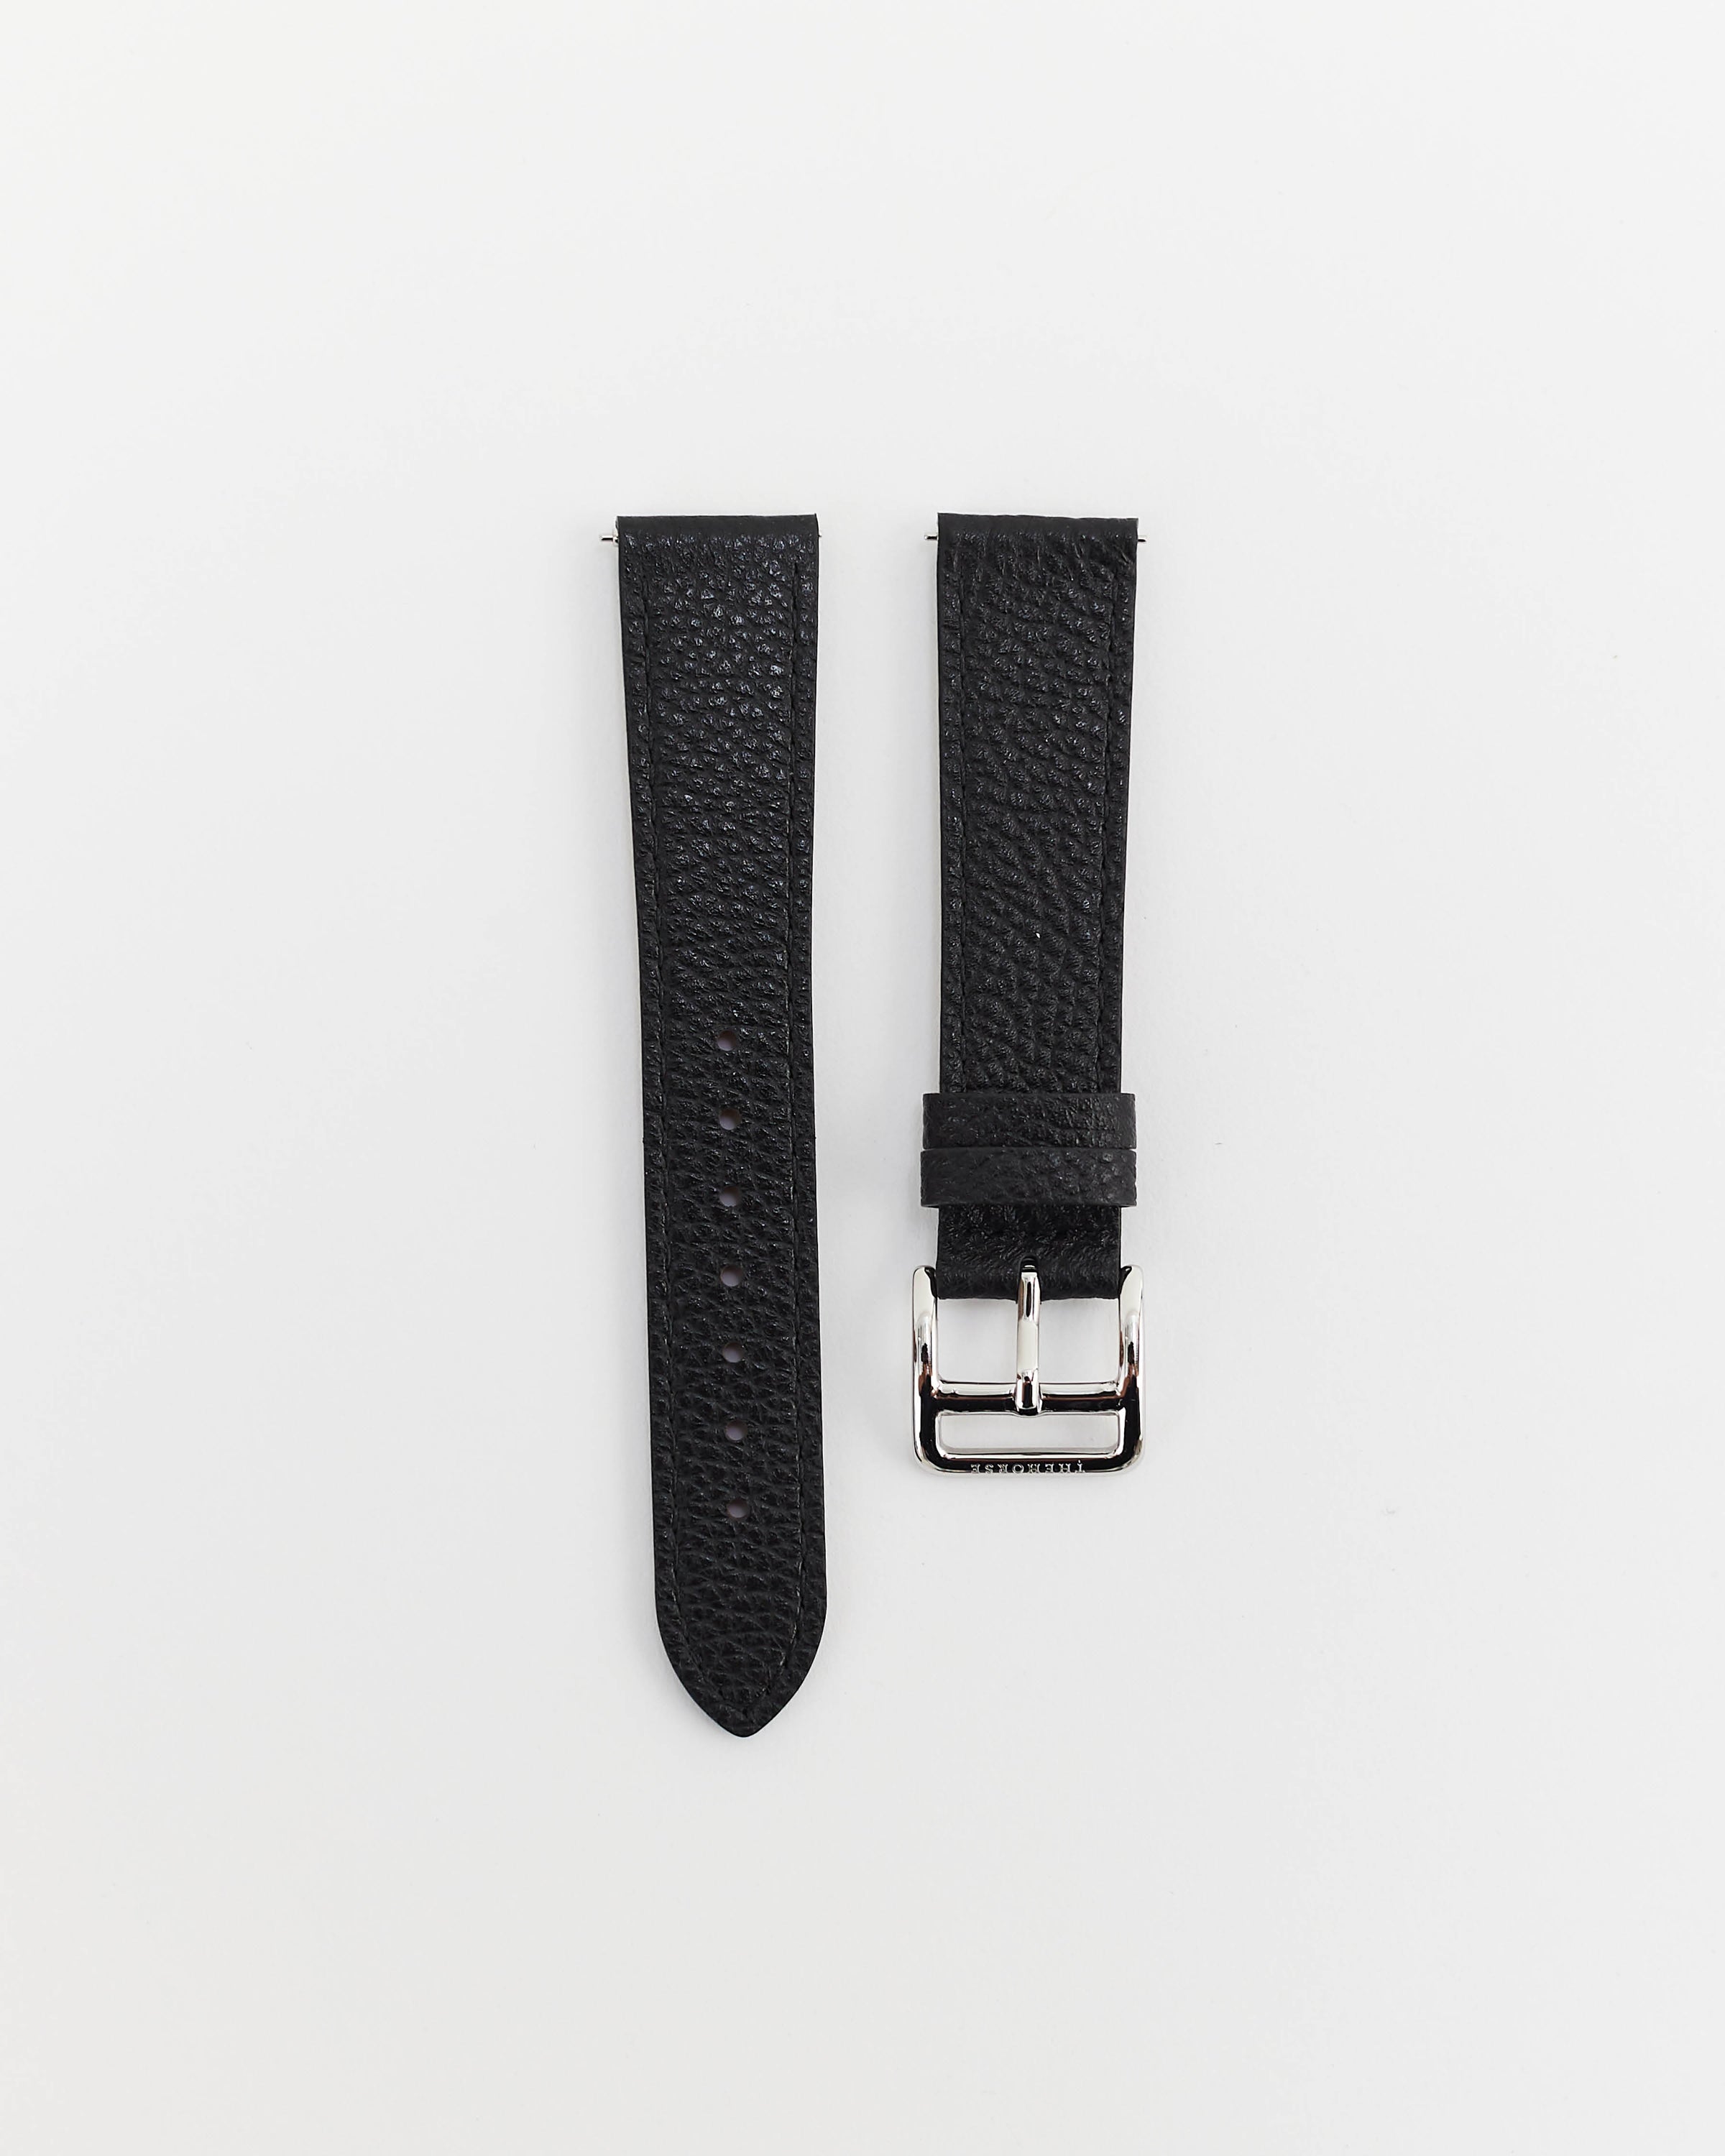 The 18mm Dress Watch Strap: Black Leather / Polished Silver Strap